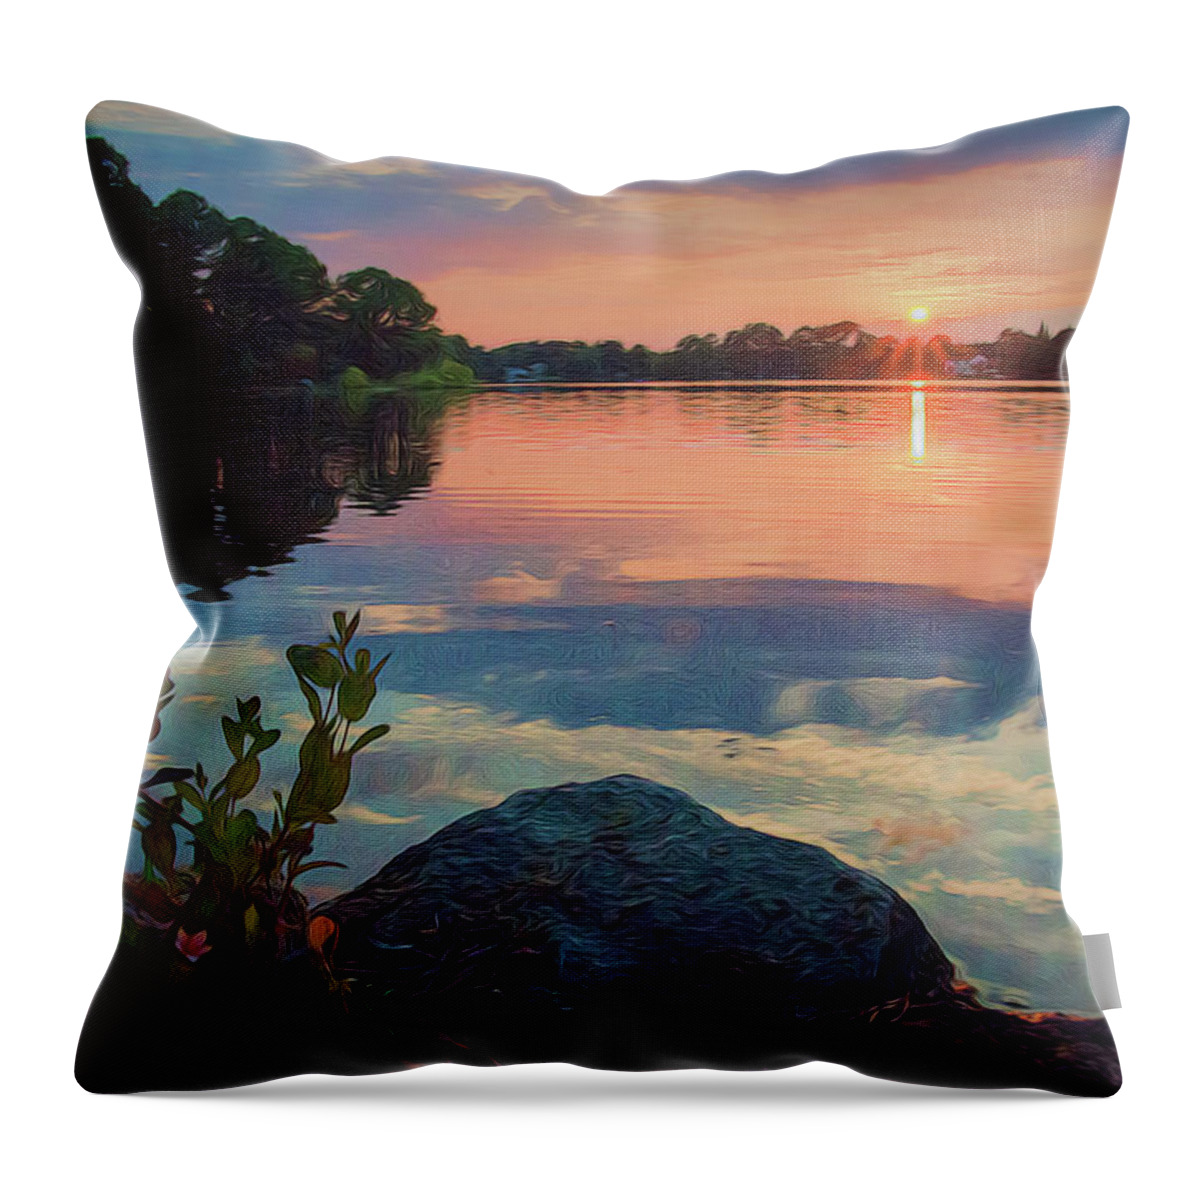 Sunset Throw Pillow featuring the photograph August Sunset by Beth Venner